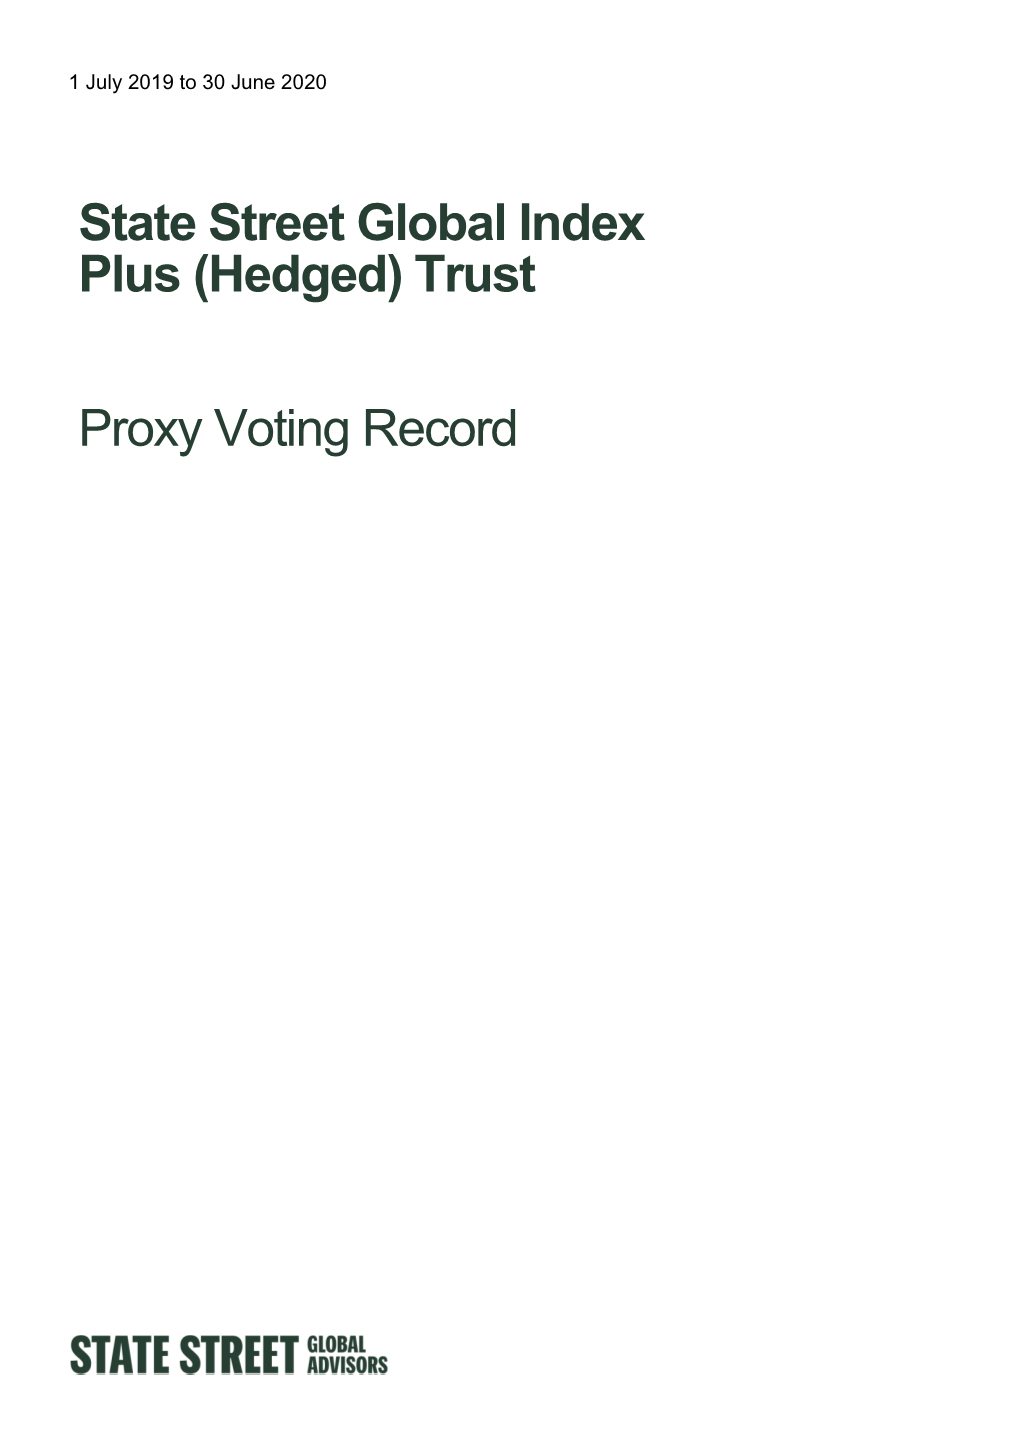 State Street Global Index Plus (Hedged) Trust Proxy Voting Record